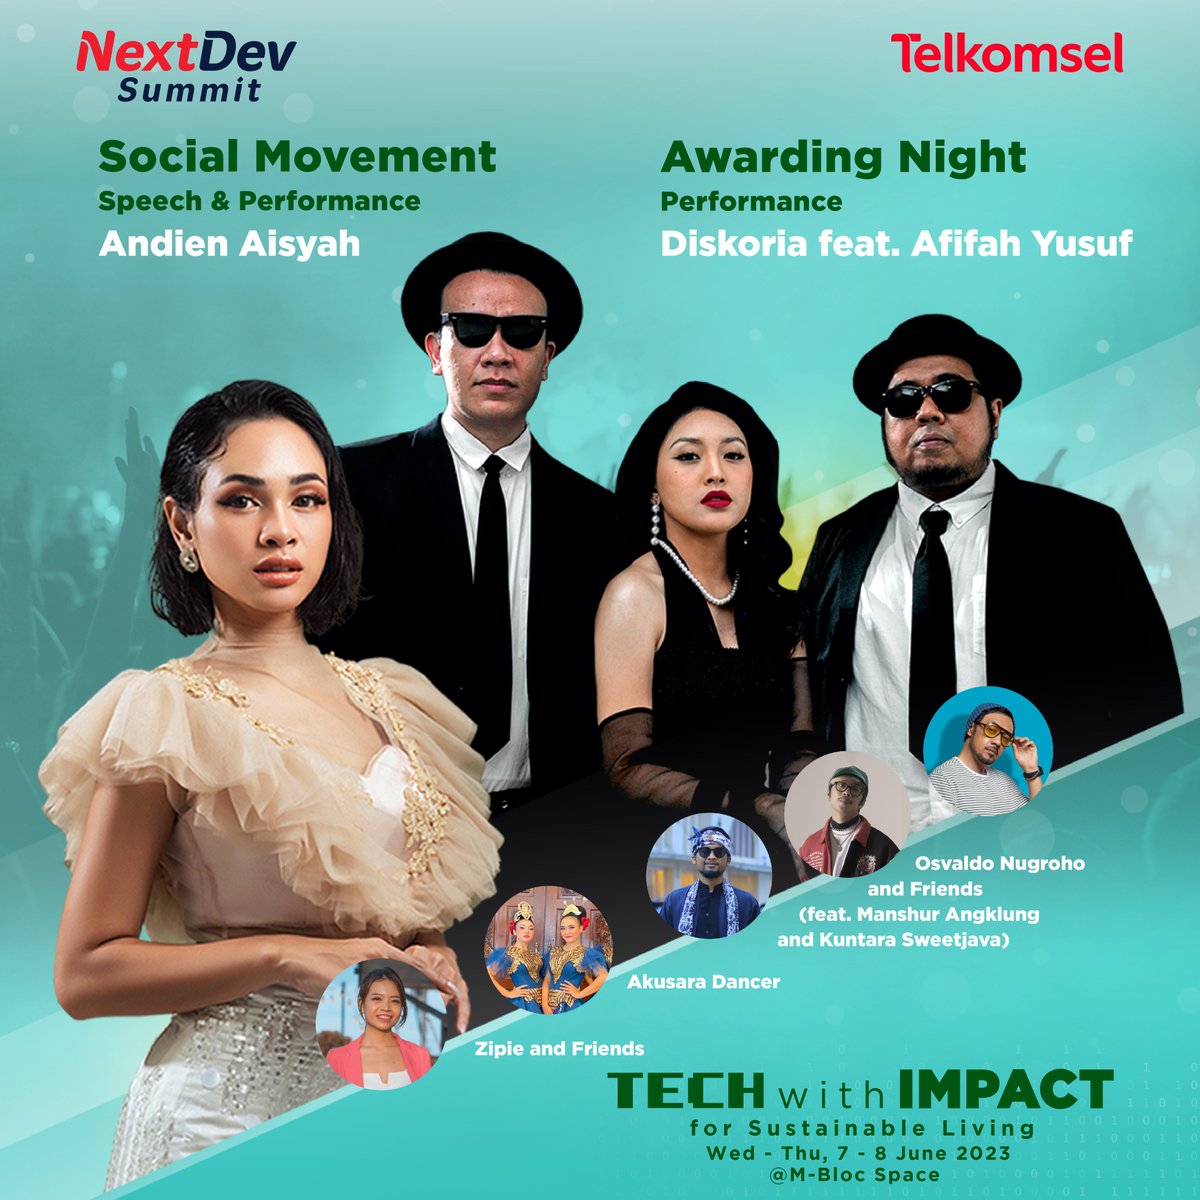 The most awaited TECH CONFERENCE is here, NextDev Summit 2023! Bakal ada Expert Talks, Silent Workshops, Demo Day, Business Matchmaking, Guest Star Performance, & Awarding Night untuk nentuin who is the best start-up this year!

See you there!
#TechwithImpactforSustainableLiving